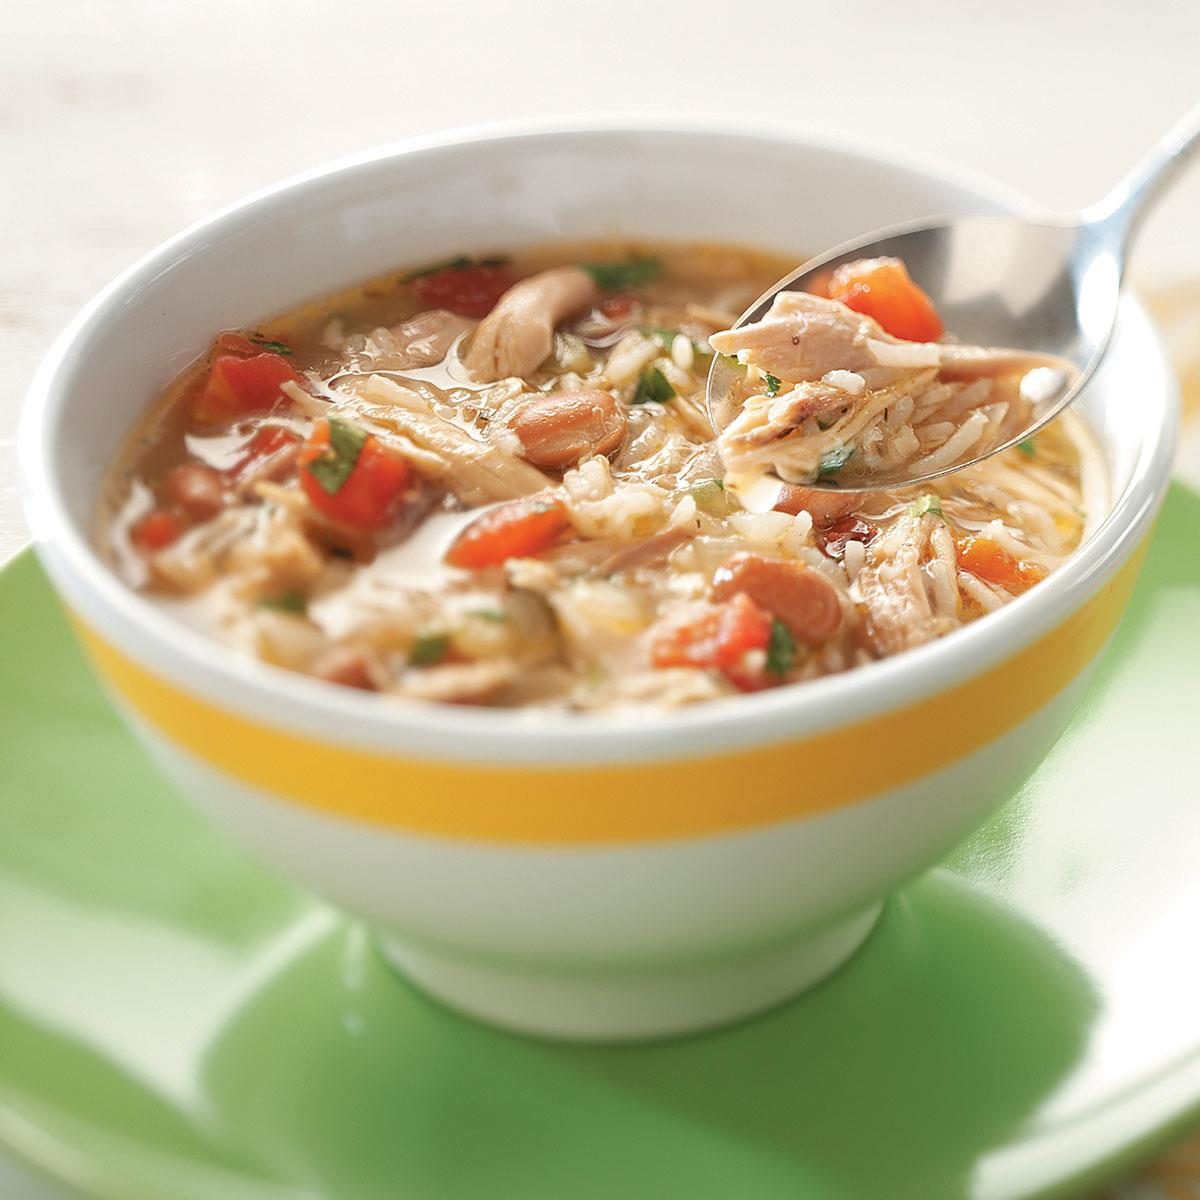 Cajun Chicken & Rice Soup Recipe: How to Make It